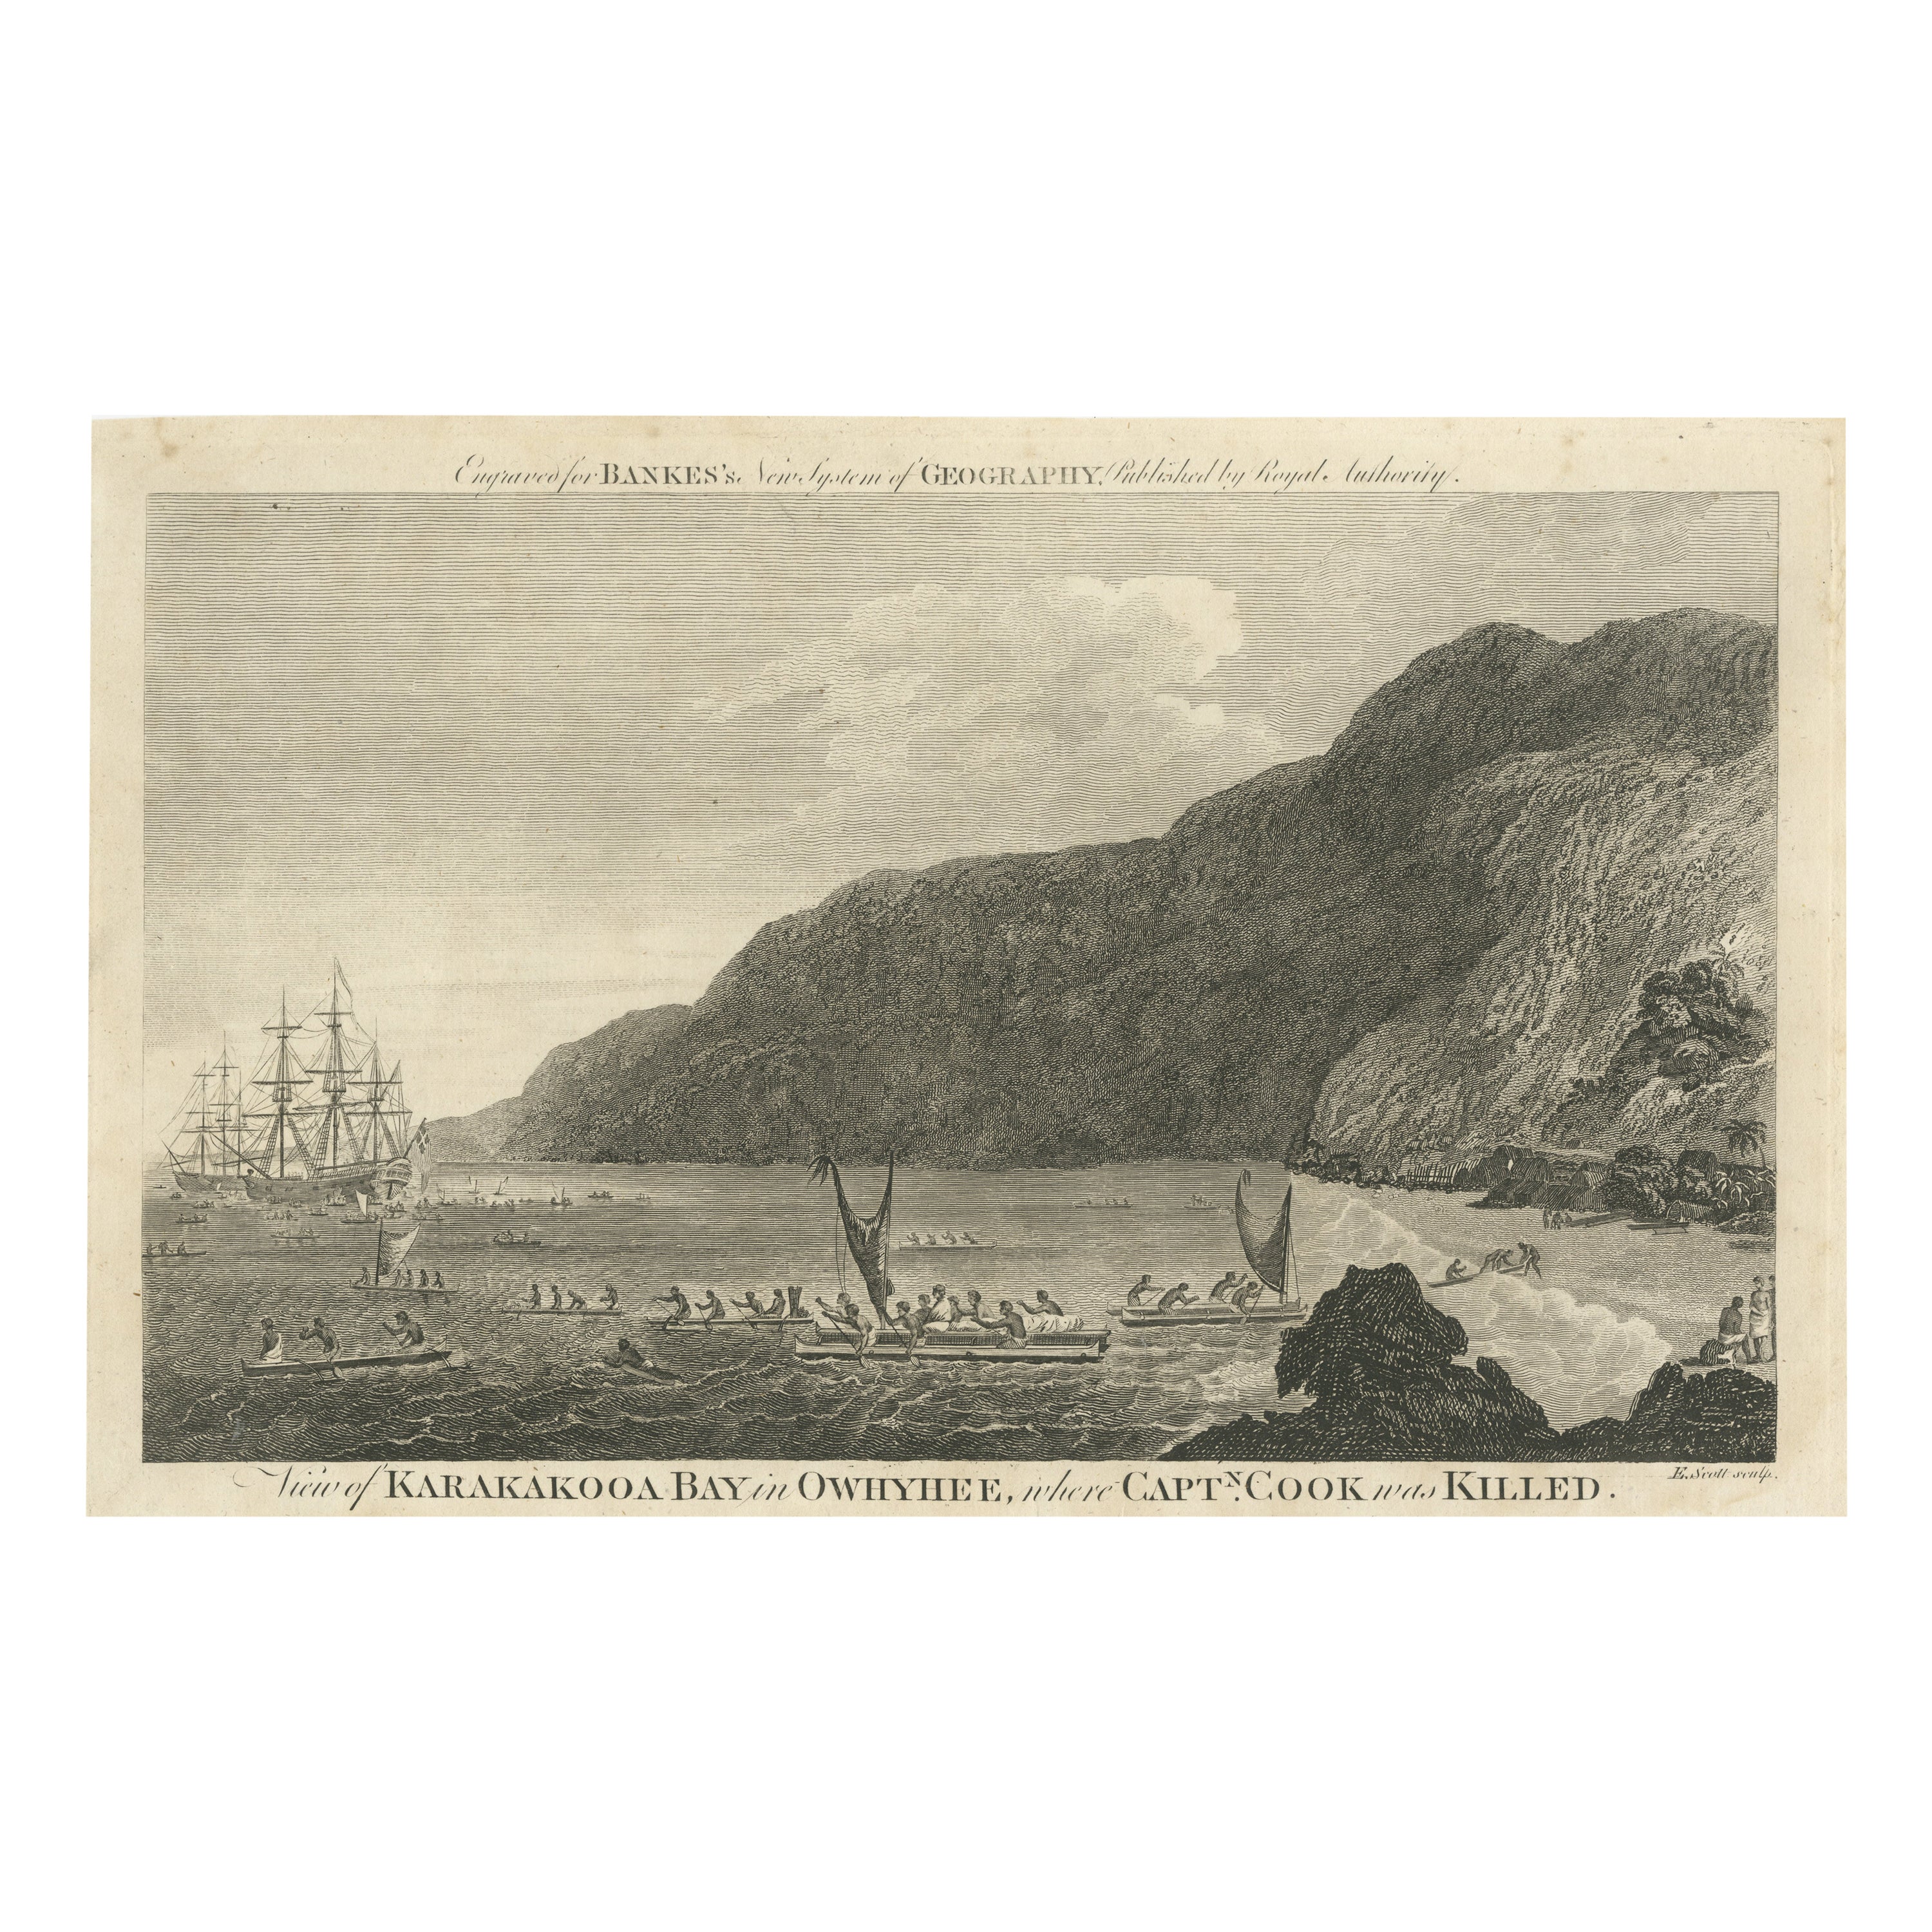 Final Voyage: The Death of Captain Cook at Kealakekua Bay, Hawaii, 1779 For Sale